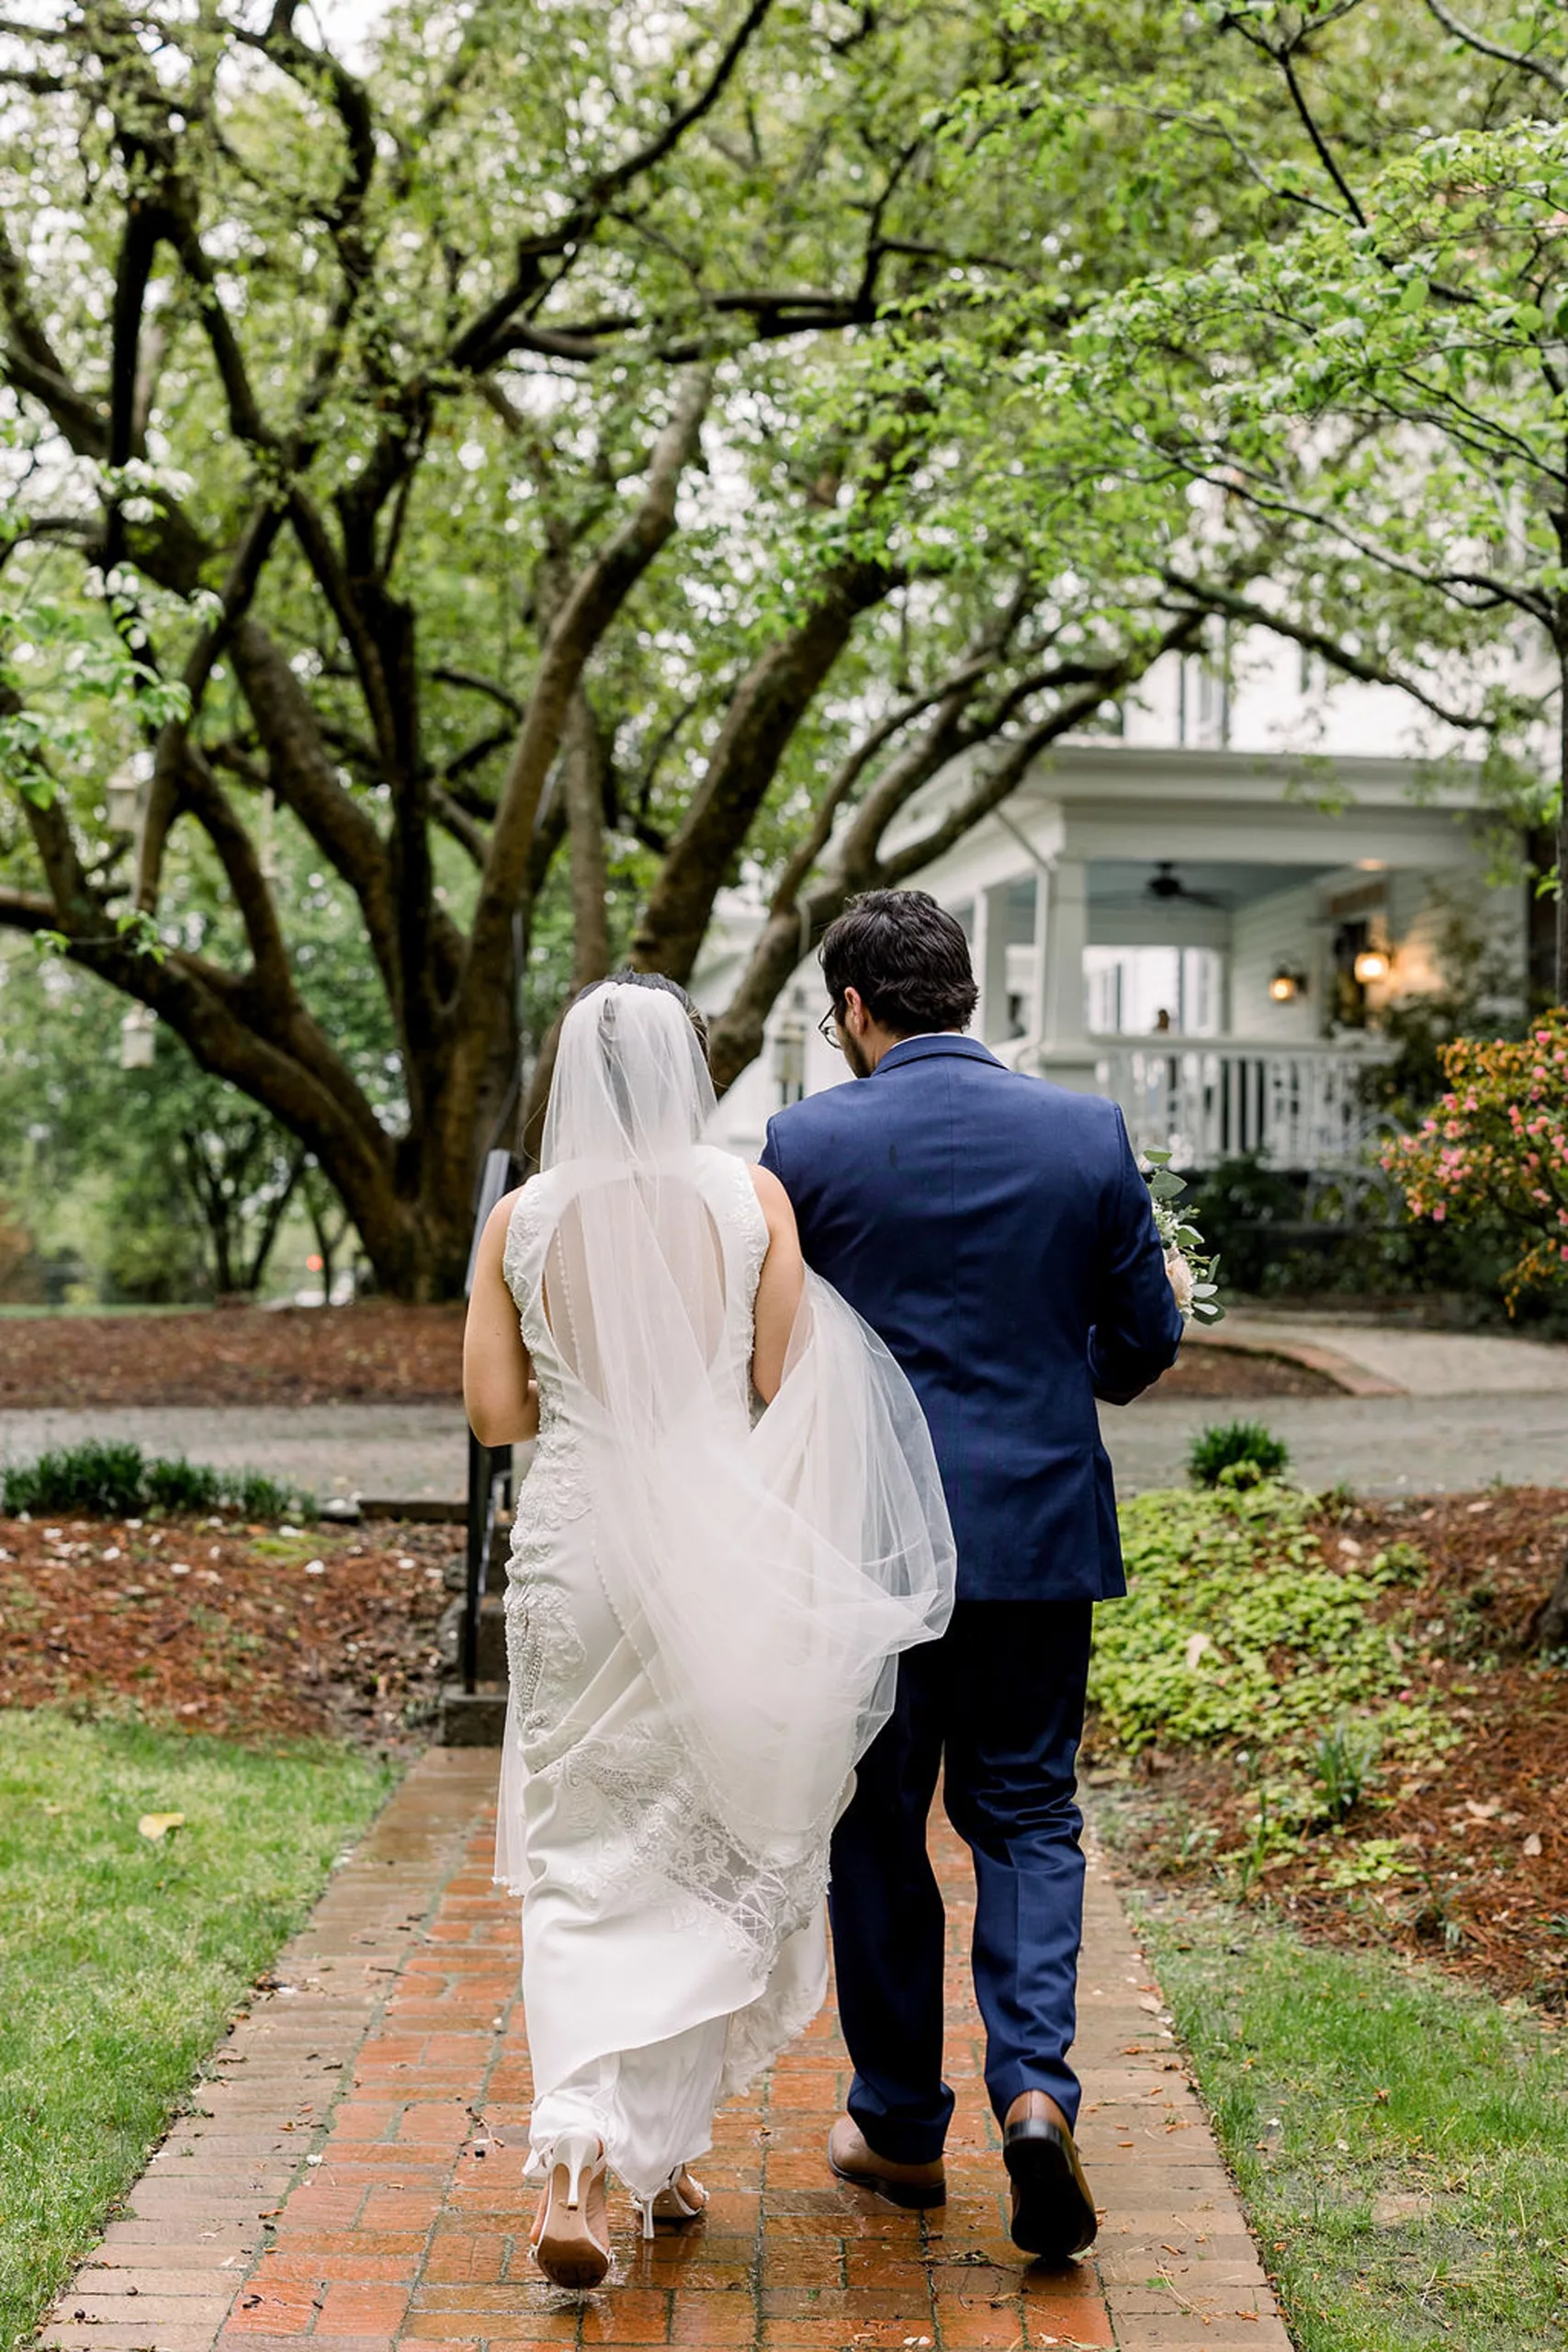 Newlyweds walk through some rain in a garden holding hands and the train back to the payne-corley house wedding venue